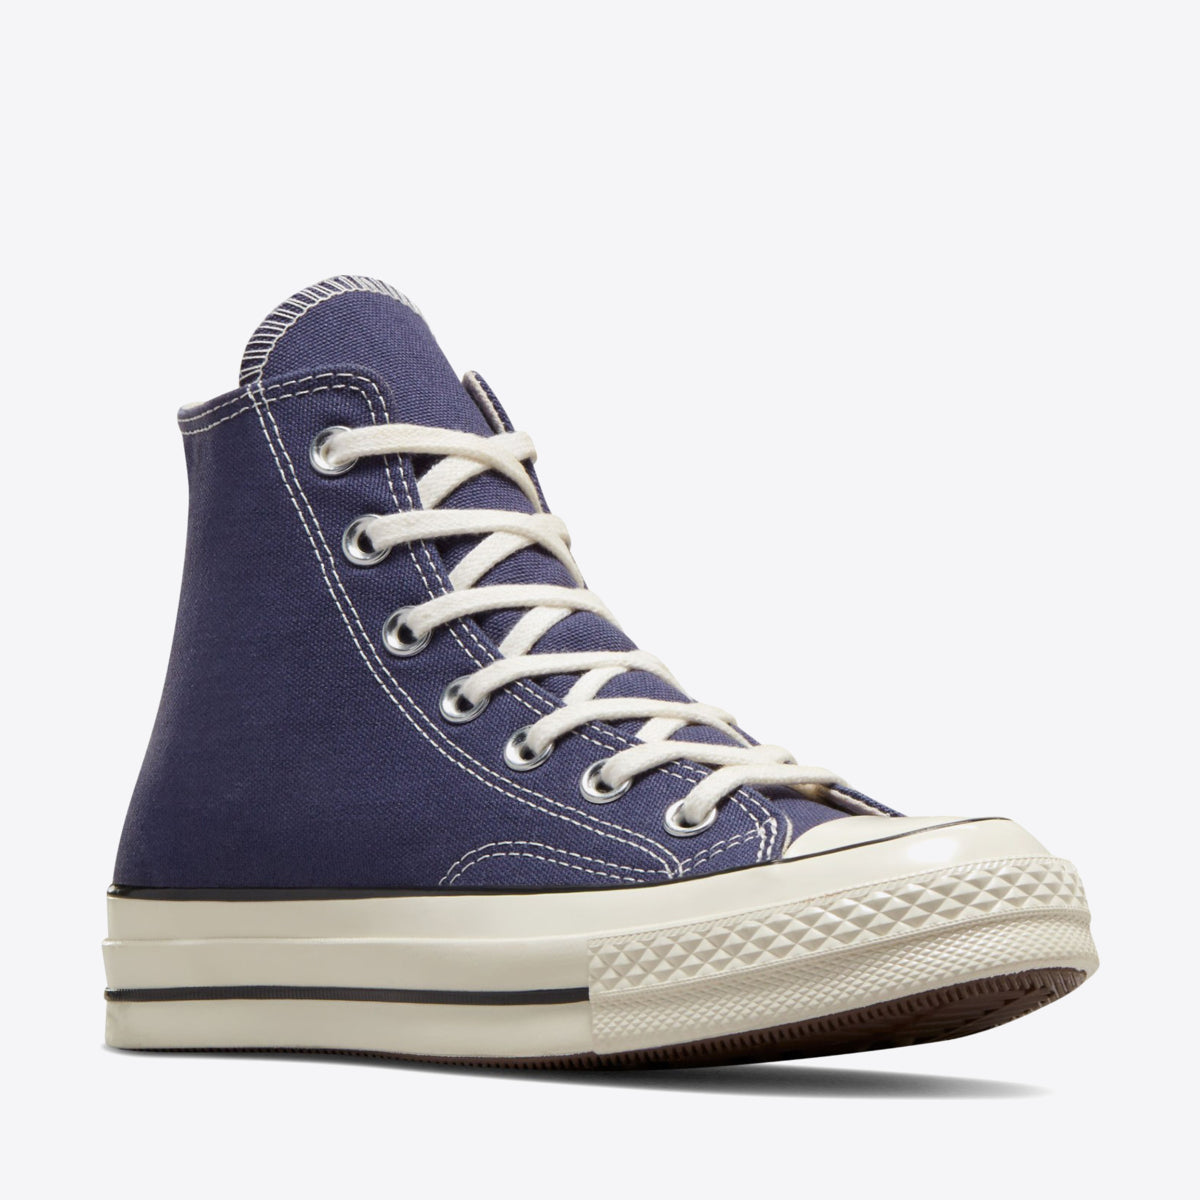 CONVERSE Chuck Taylor 70 Seasonal High Uncharted Waters/Egret - Image 6